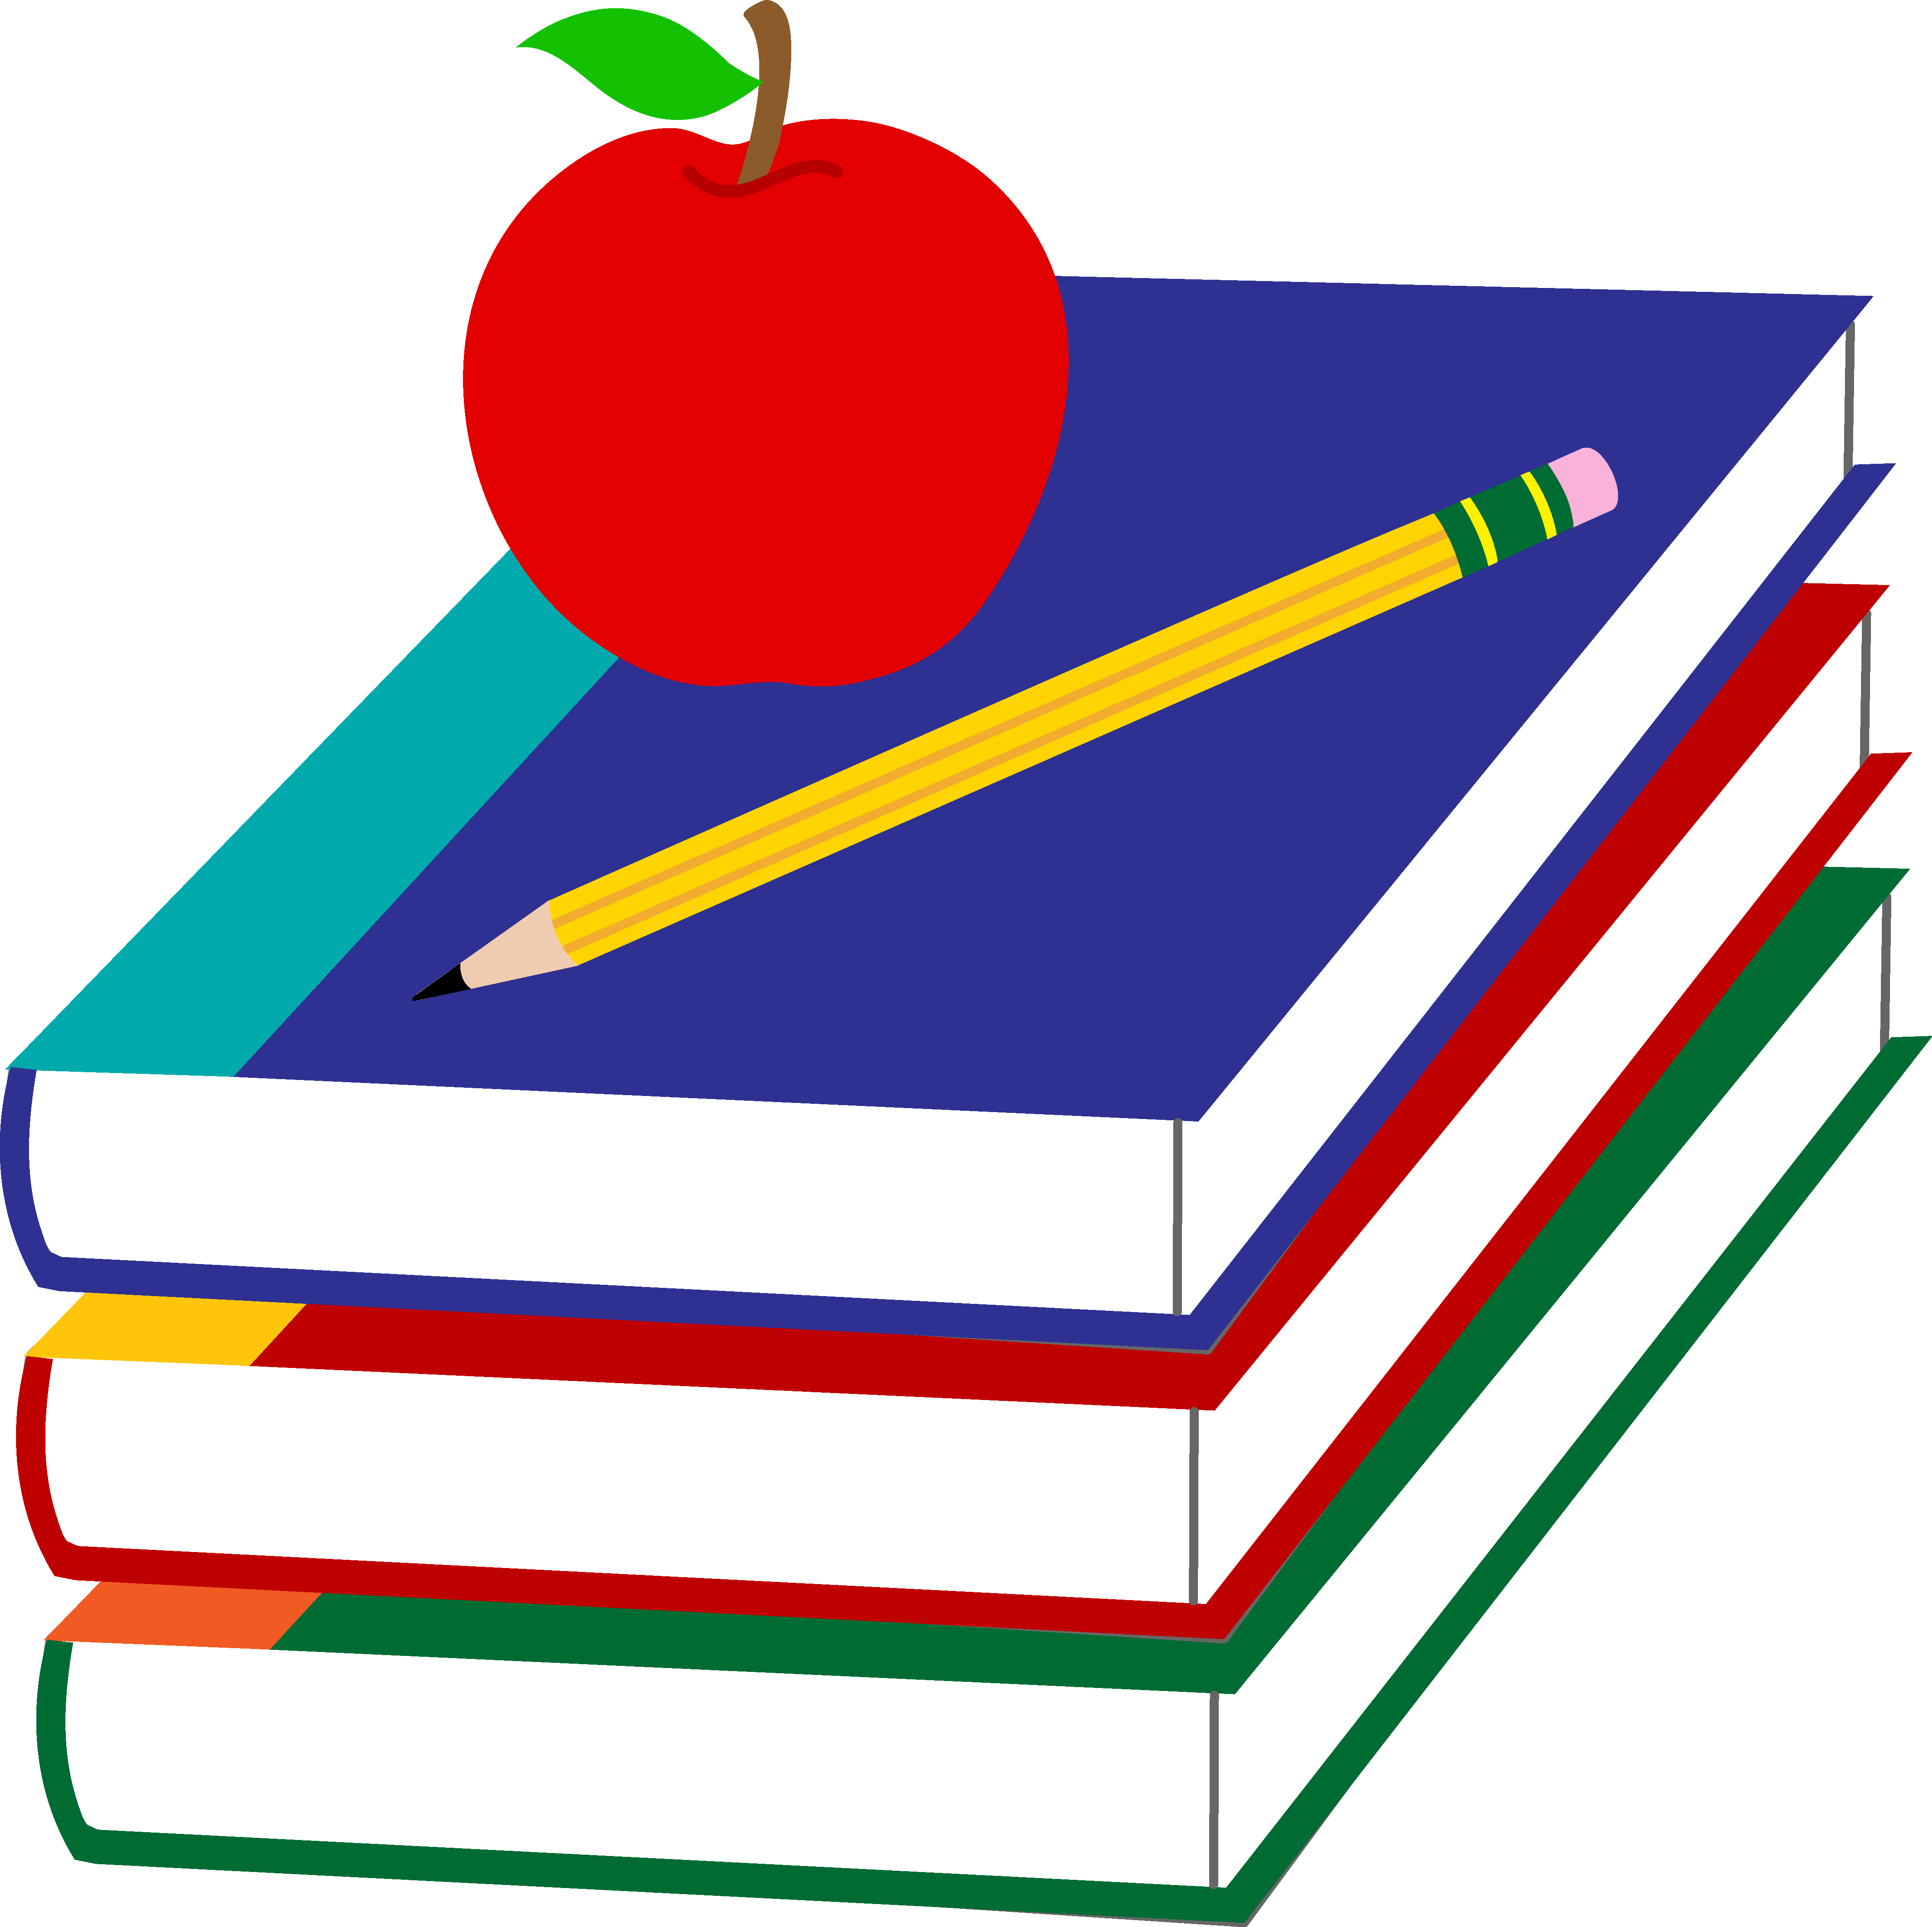 Indian clipart baker. Apple and book png